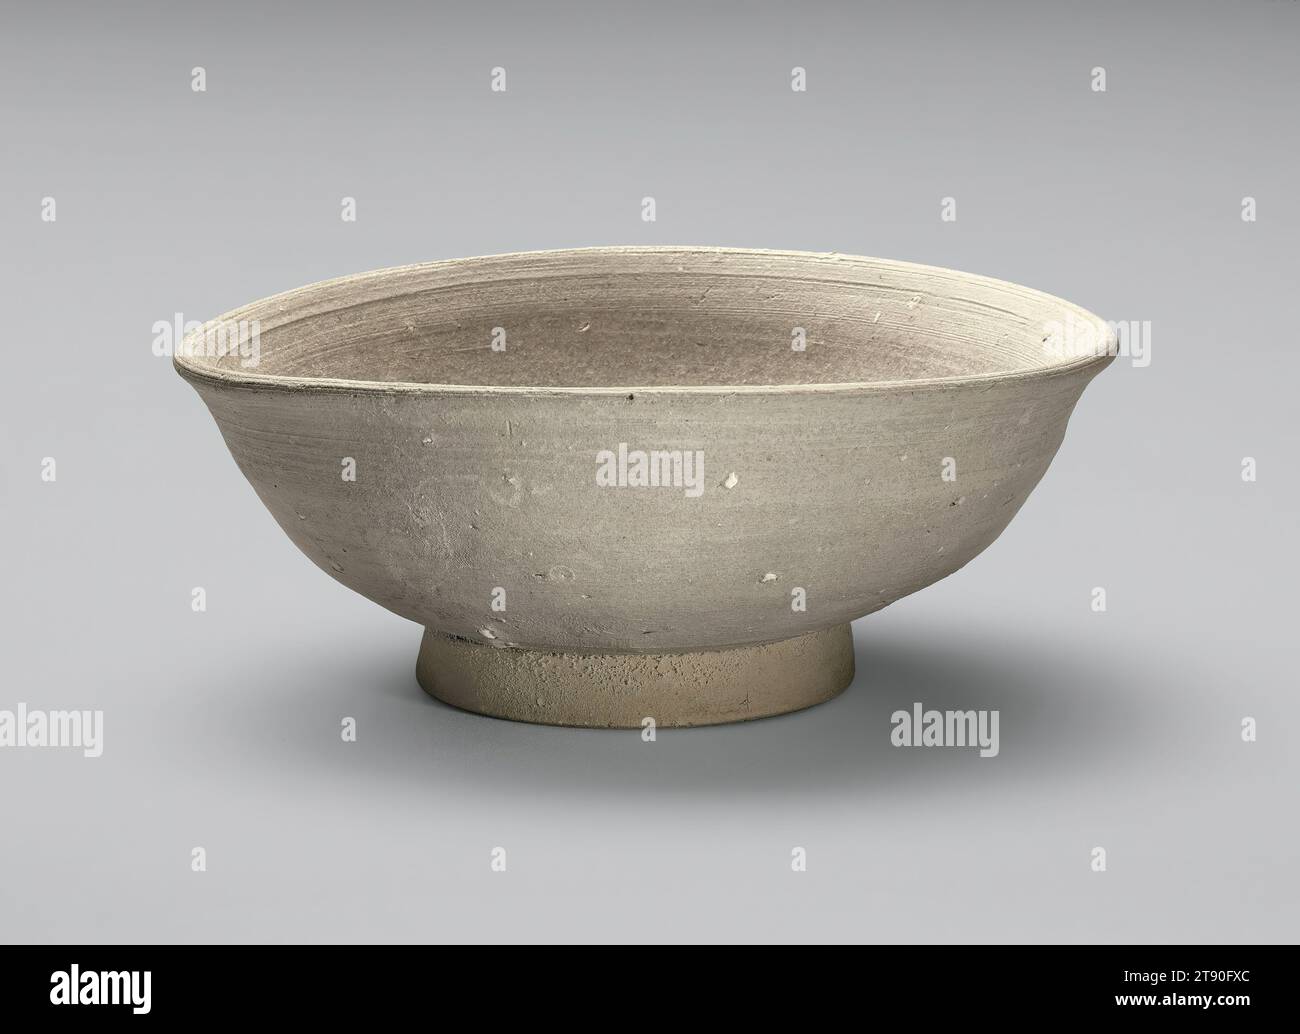 Bowl, 12th century, Unknown Japanese, 2 7/16 × 5 3/4 × 6 3/16 in. (6.19 × 14.61 × 15.72 cm), Sanage ware; stoneware, Japan, 12th century, Sanage ware resembles Chinese ceramics, having emerged in the 700s as an affordable substitute for expensive imported Chinese ceramics and the Japanese luxury wares they inspired. Known as the earliest glazed stoneware in Japan, Sanage ware was primarily made in central Honshū, the largest and most populous island of Japan, and remained popular until the 1100s, when it was superseded by another type of glazed stoneware produced in the region Stock Photo